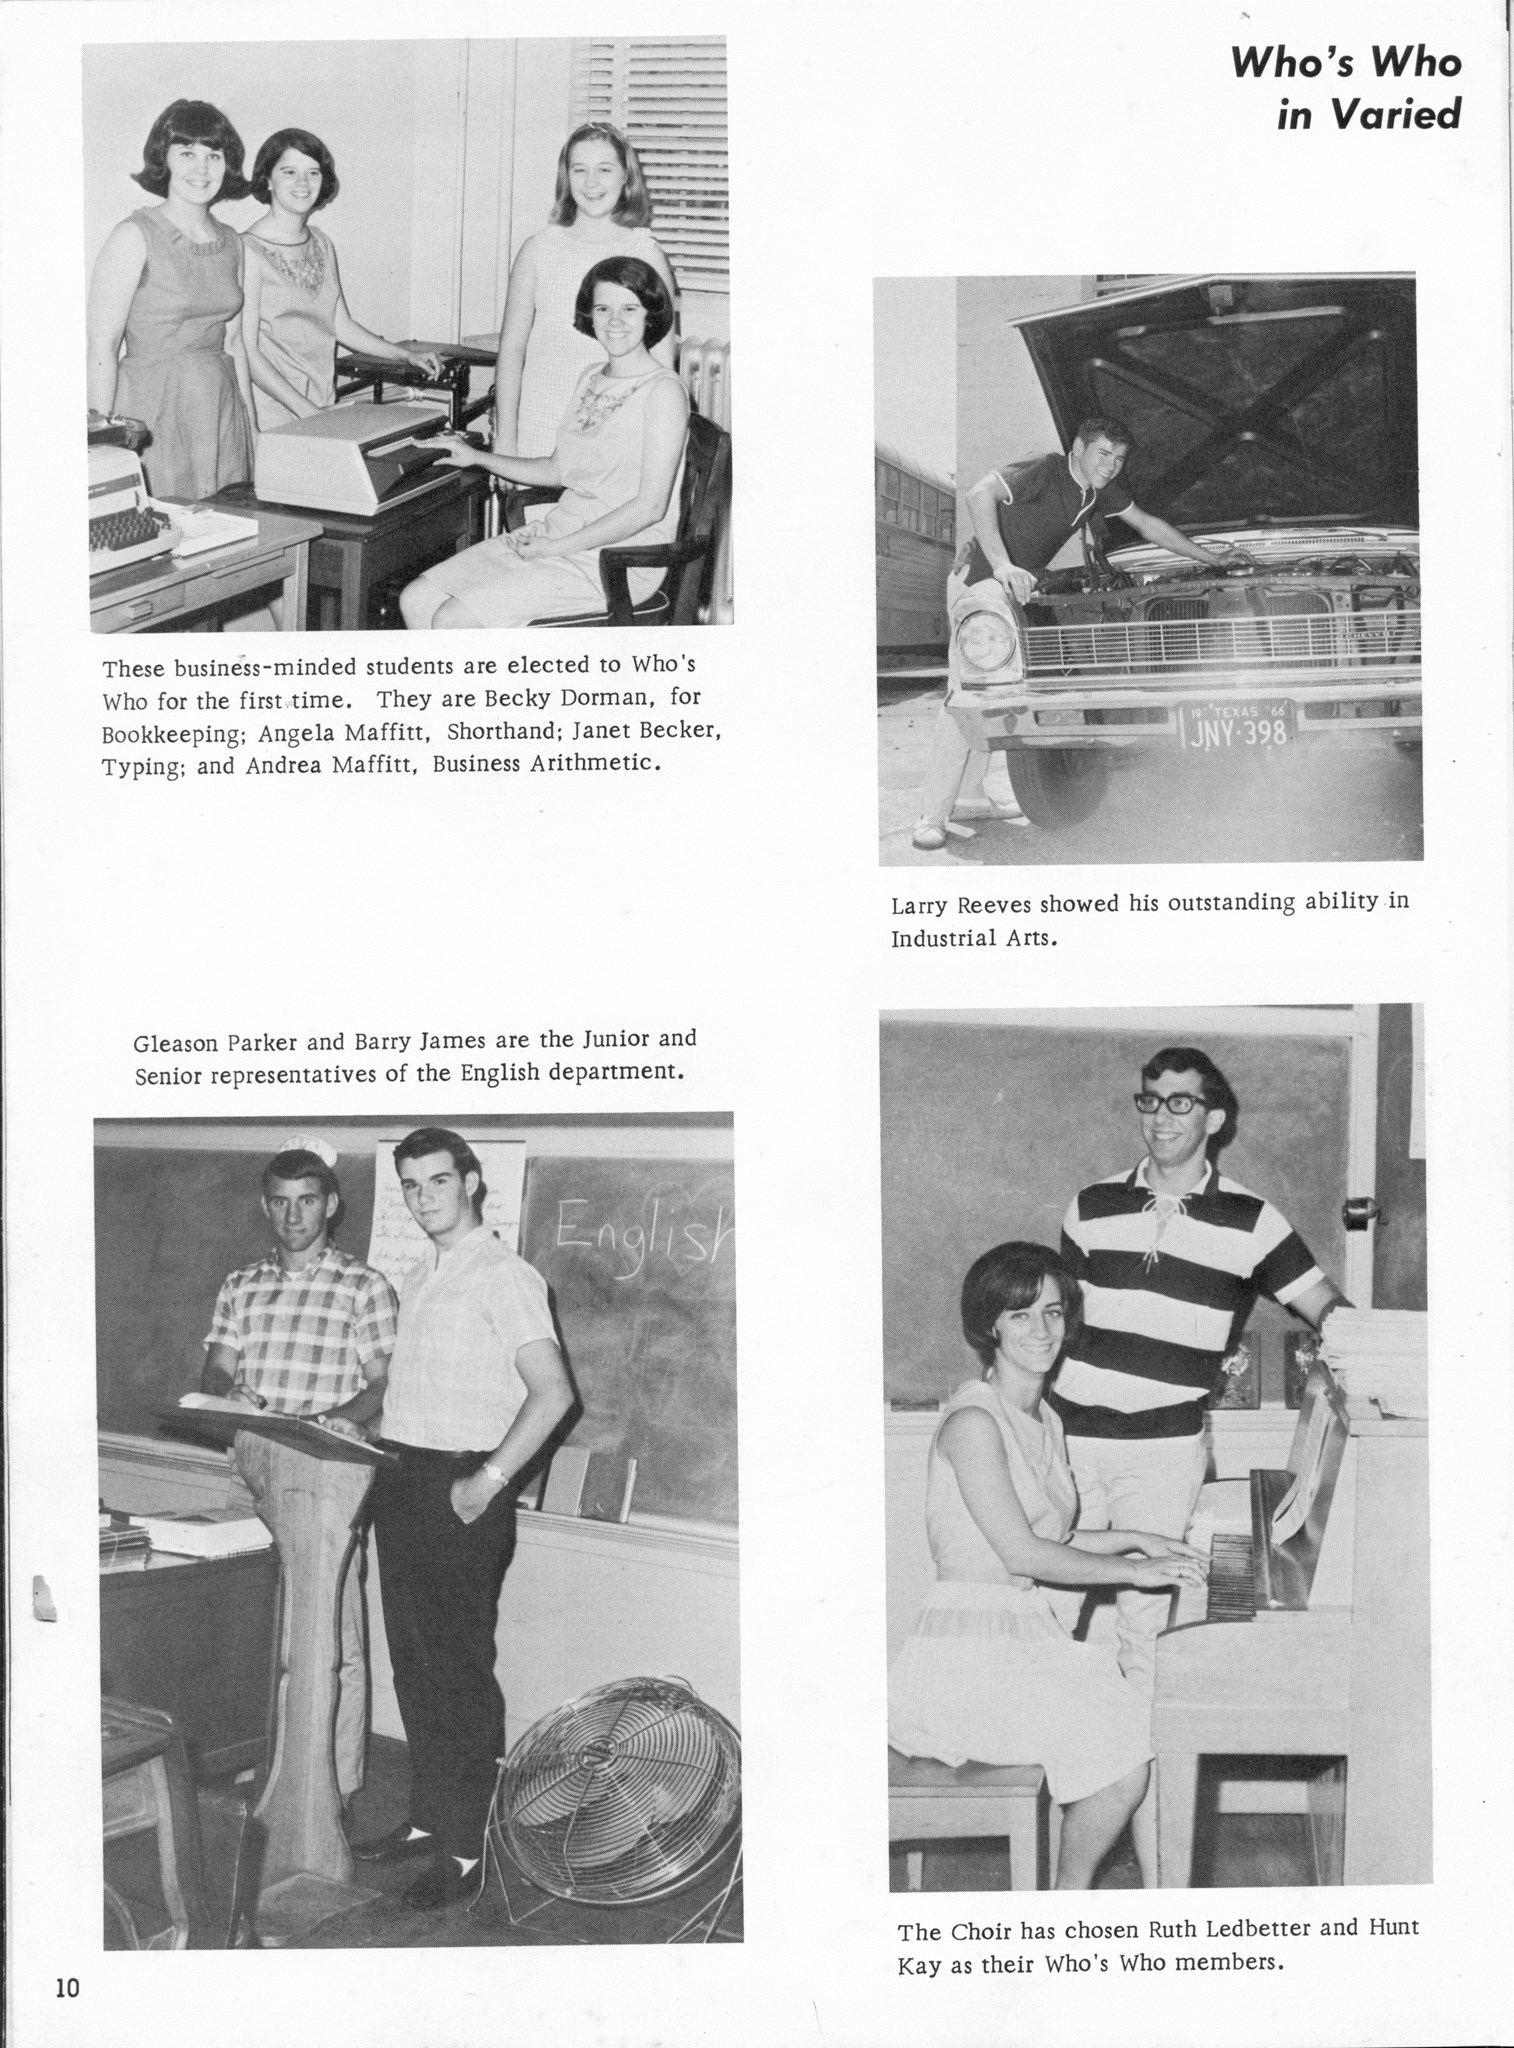 ../../../Images/Large/1966/Arclight-1966-pg0010.jpg